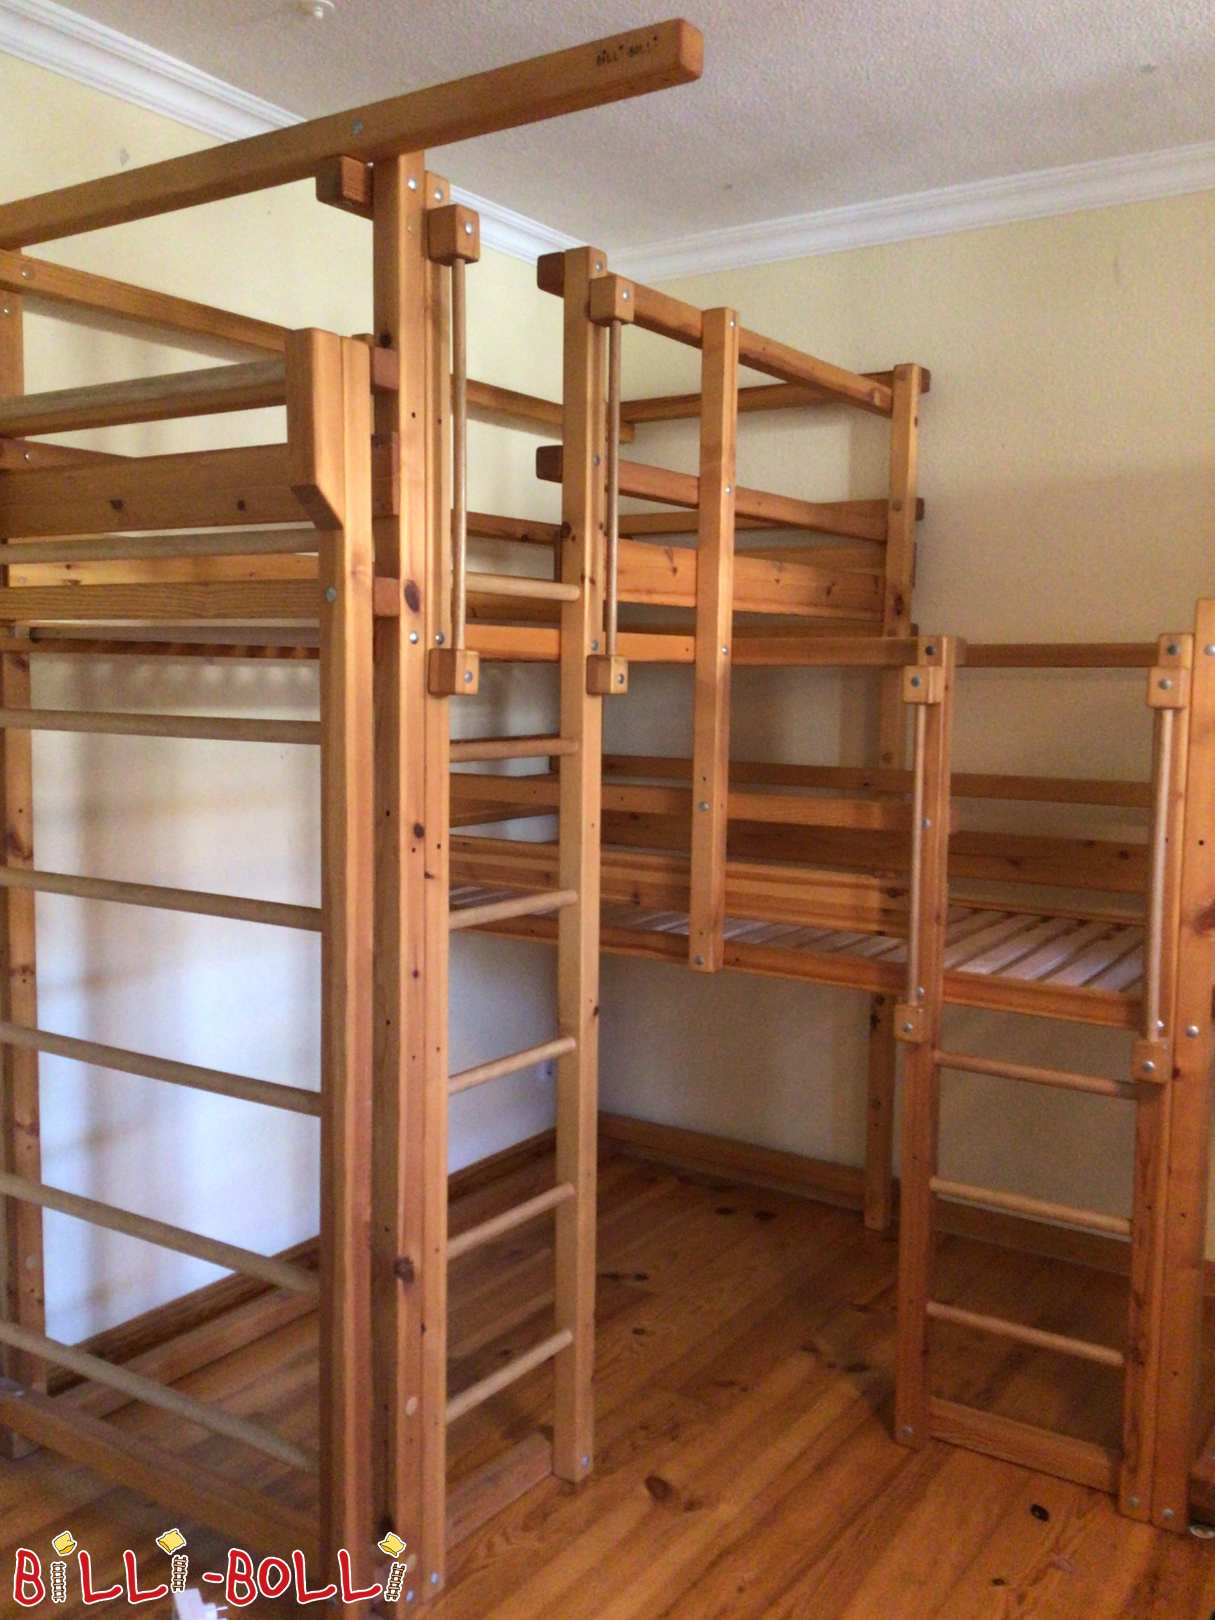 Both-top bed type 2A with wall bars in Berlin (Category: Both-Up Bunk Beds pre-owned)